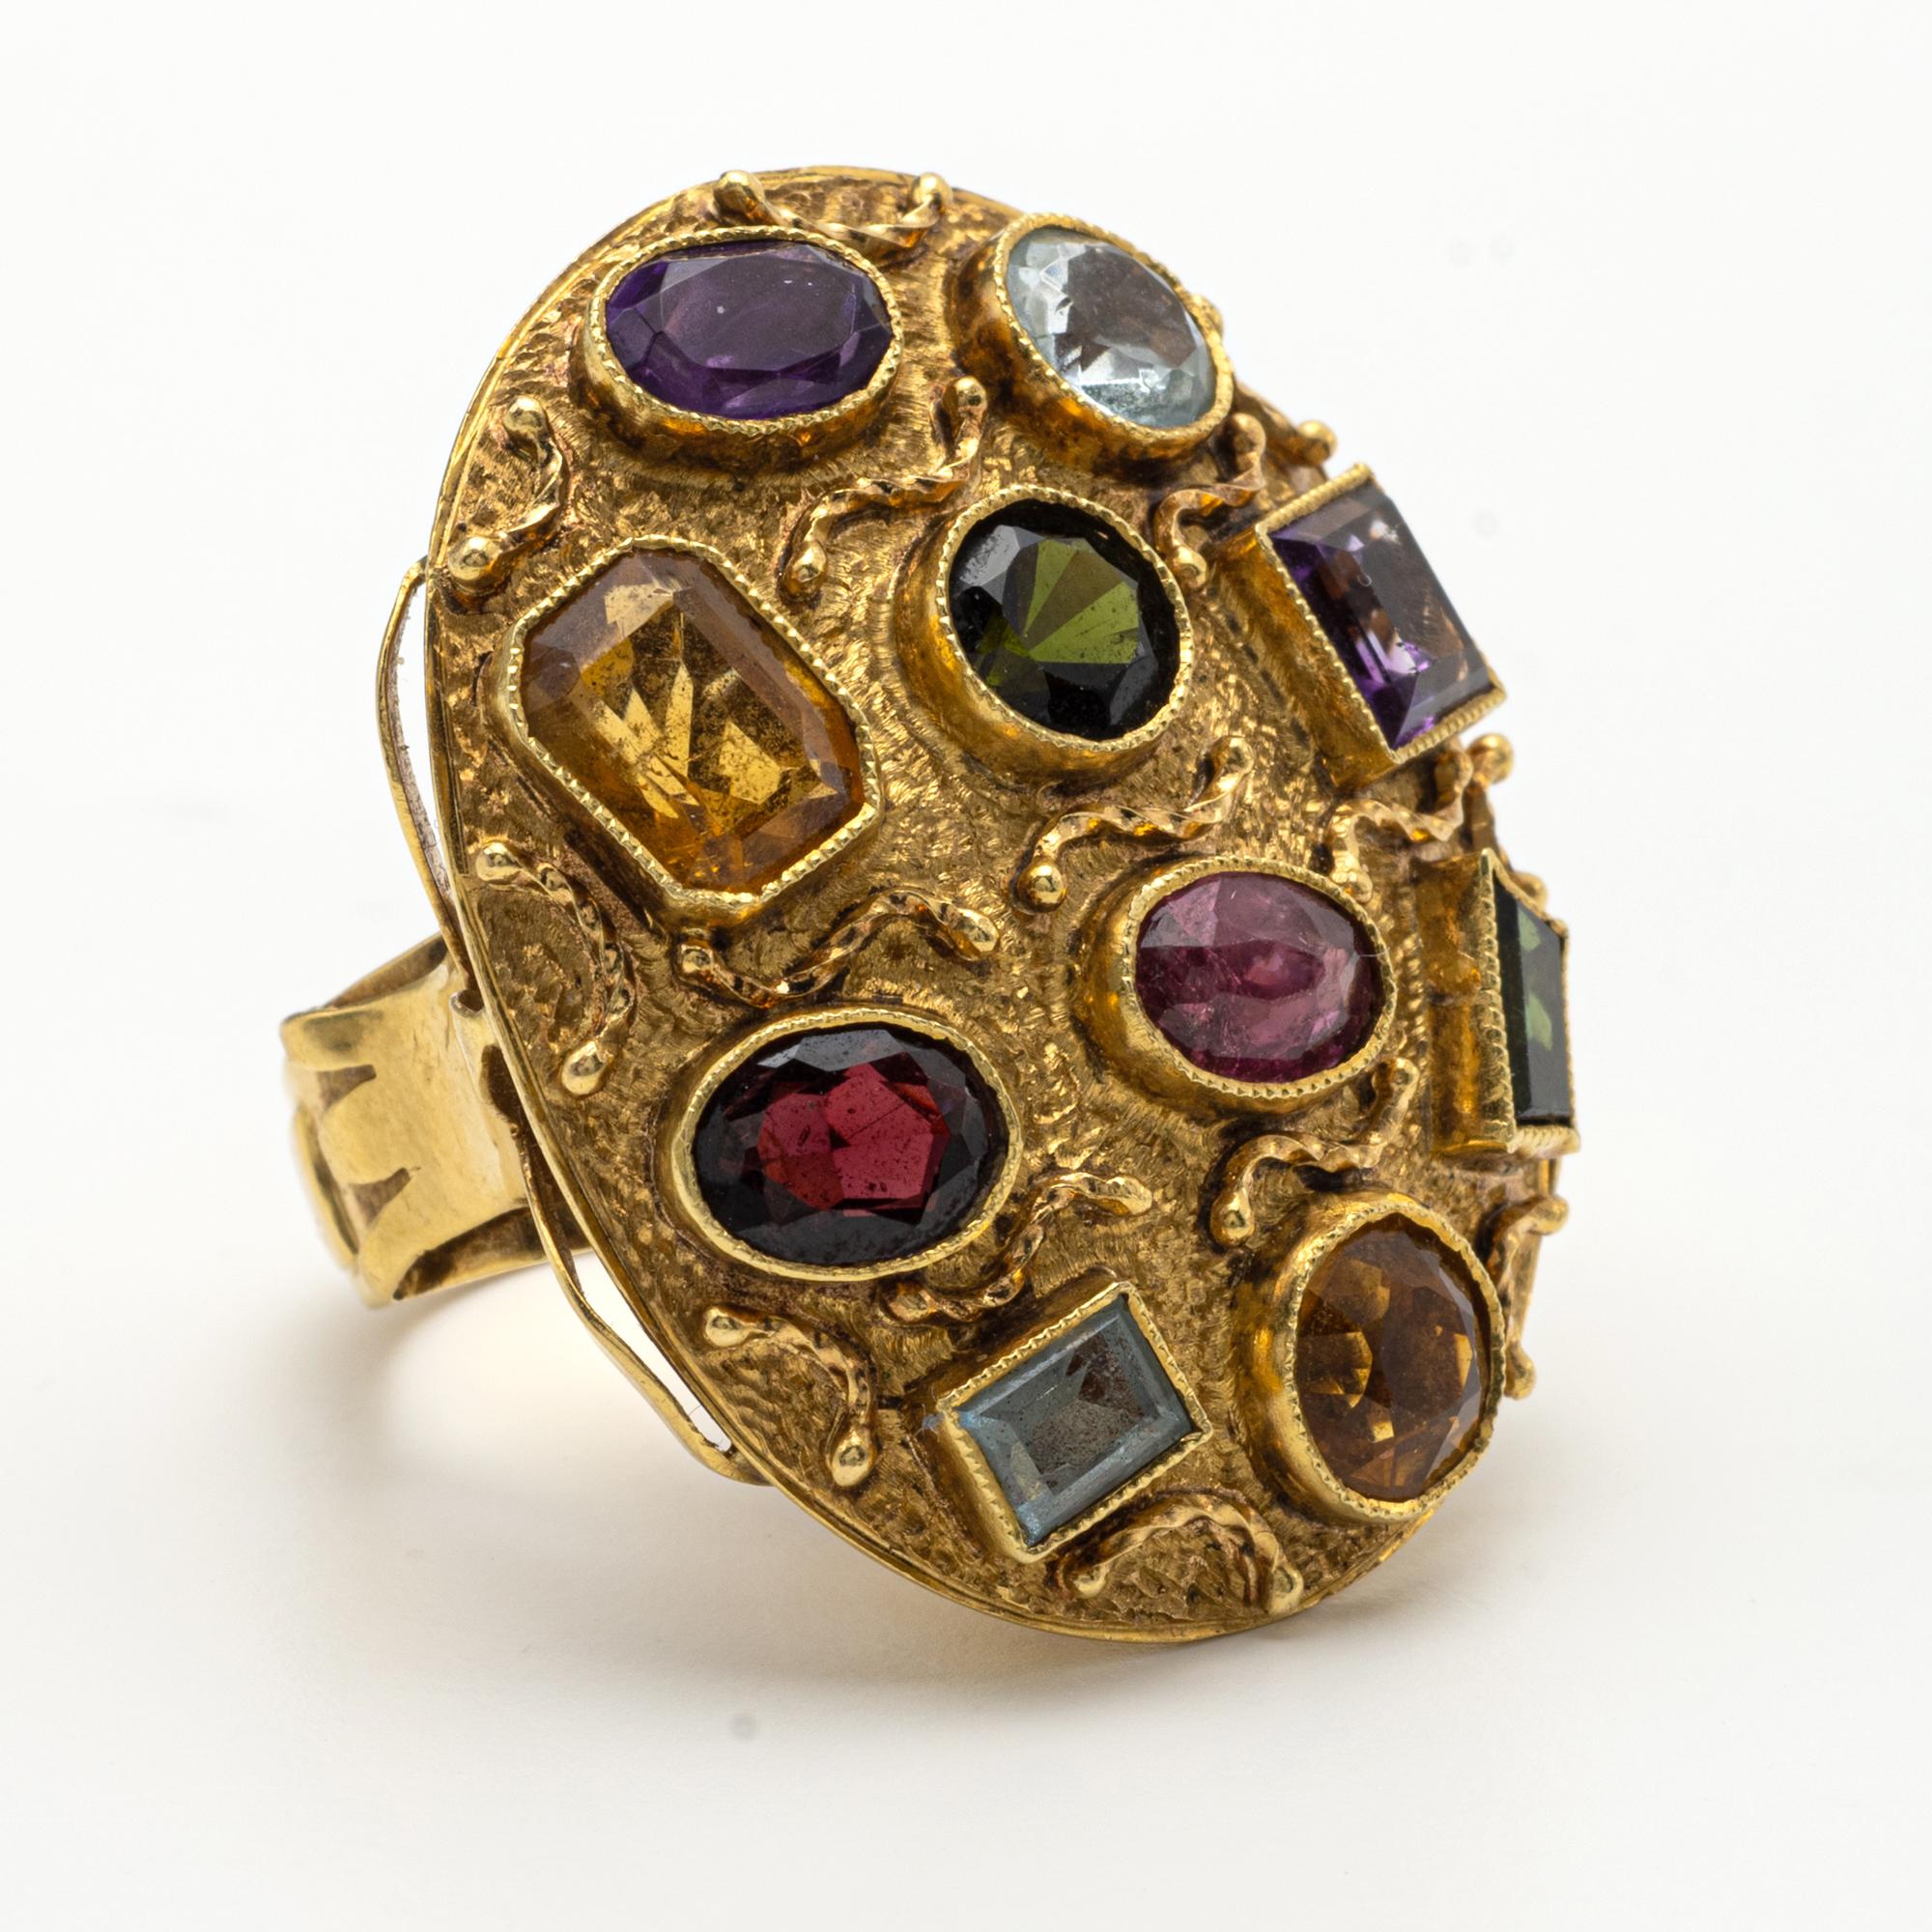 Gold and Colored Stone Ring
size 6